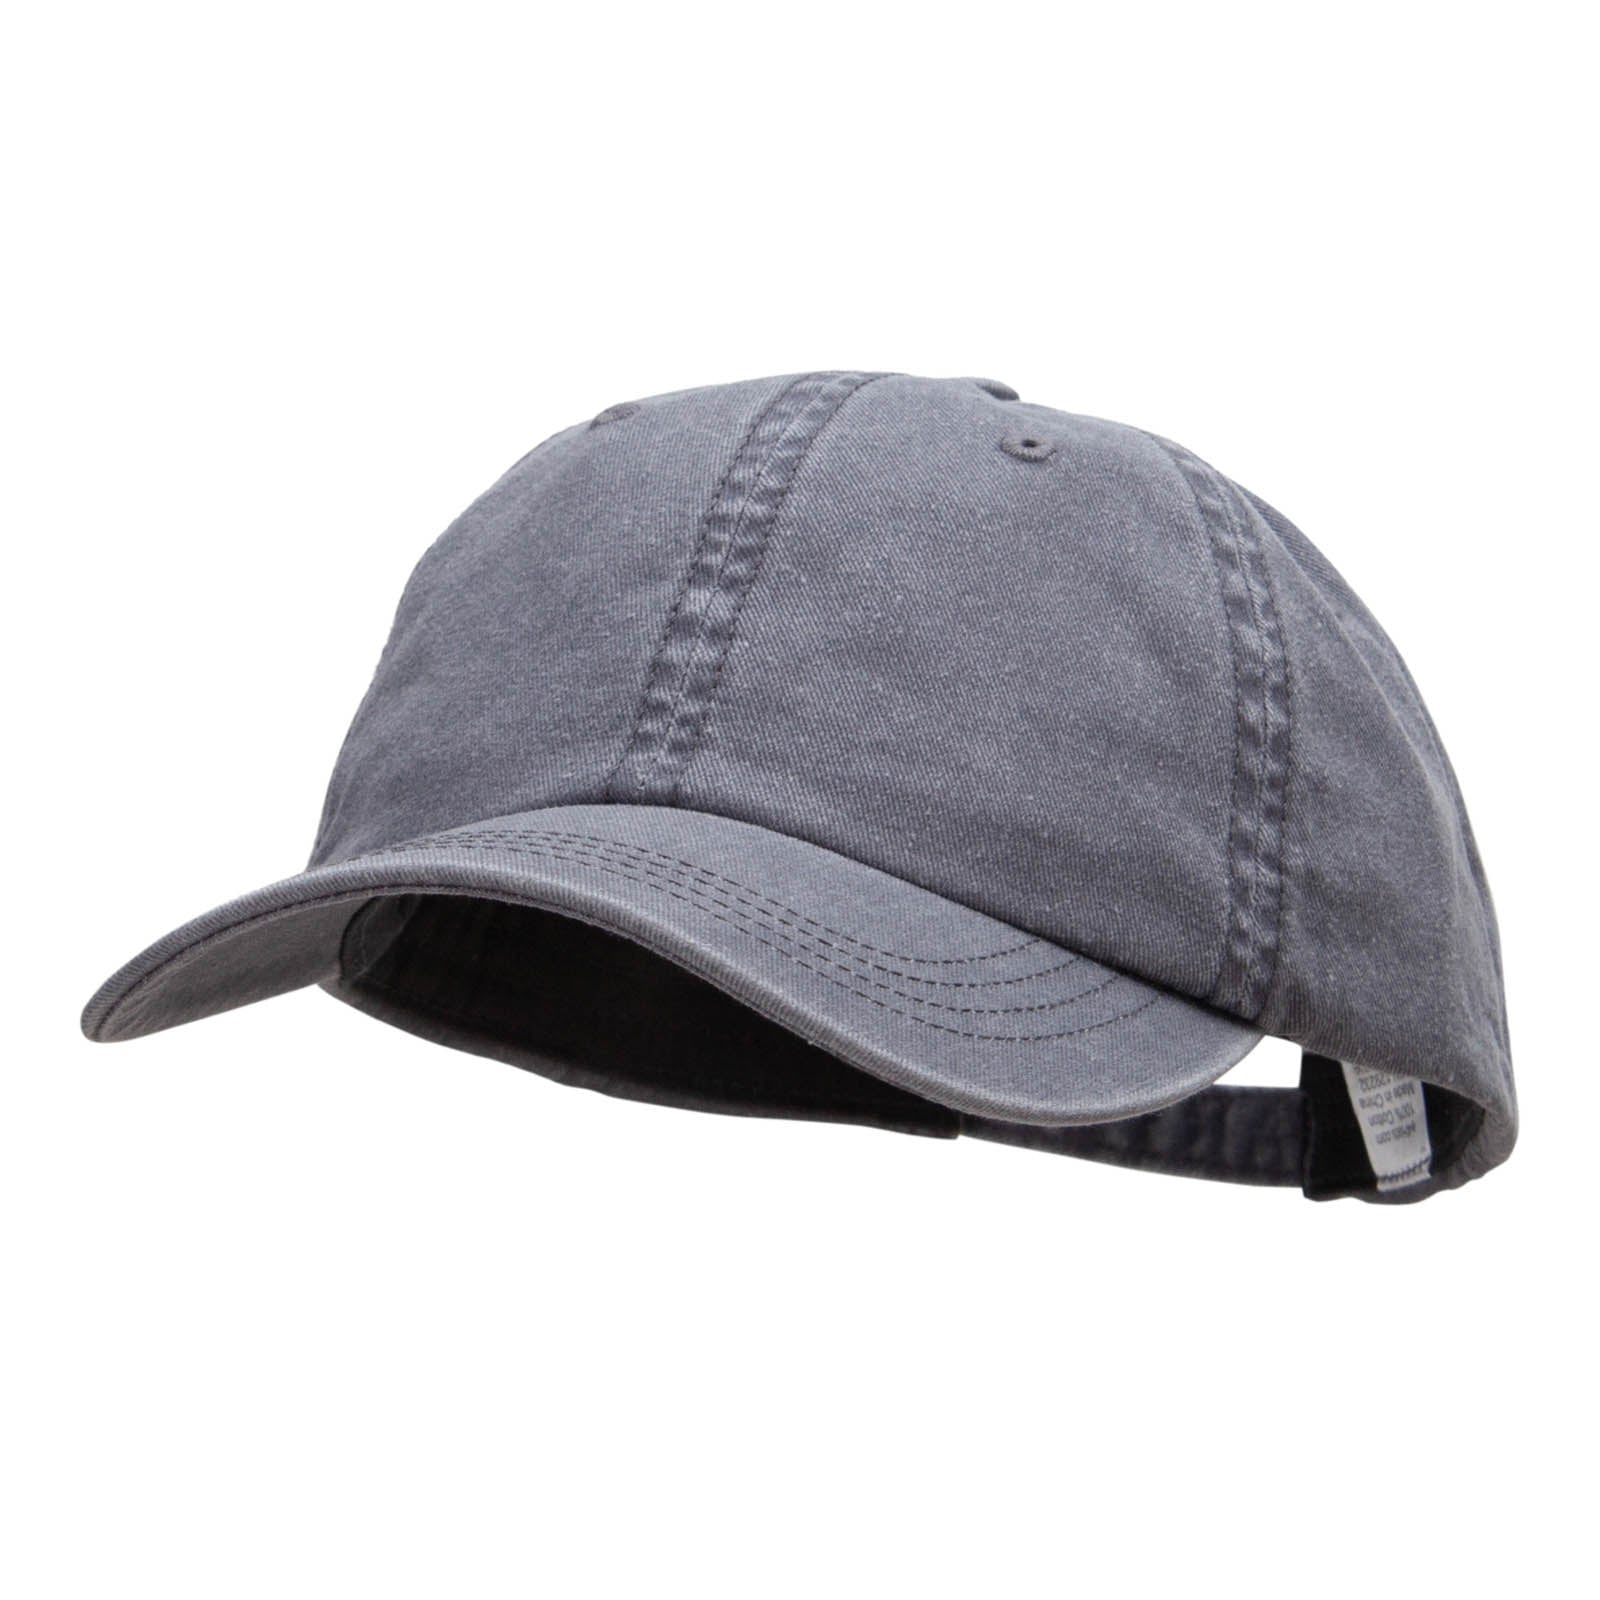 Big Size Washed Pigment Dyed Cap - Grey XL-3XL